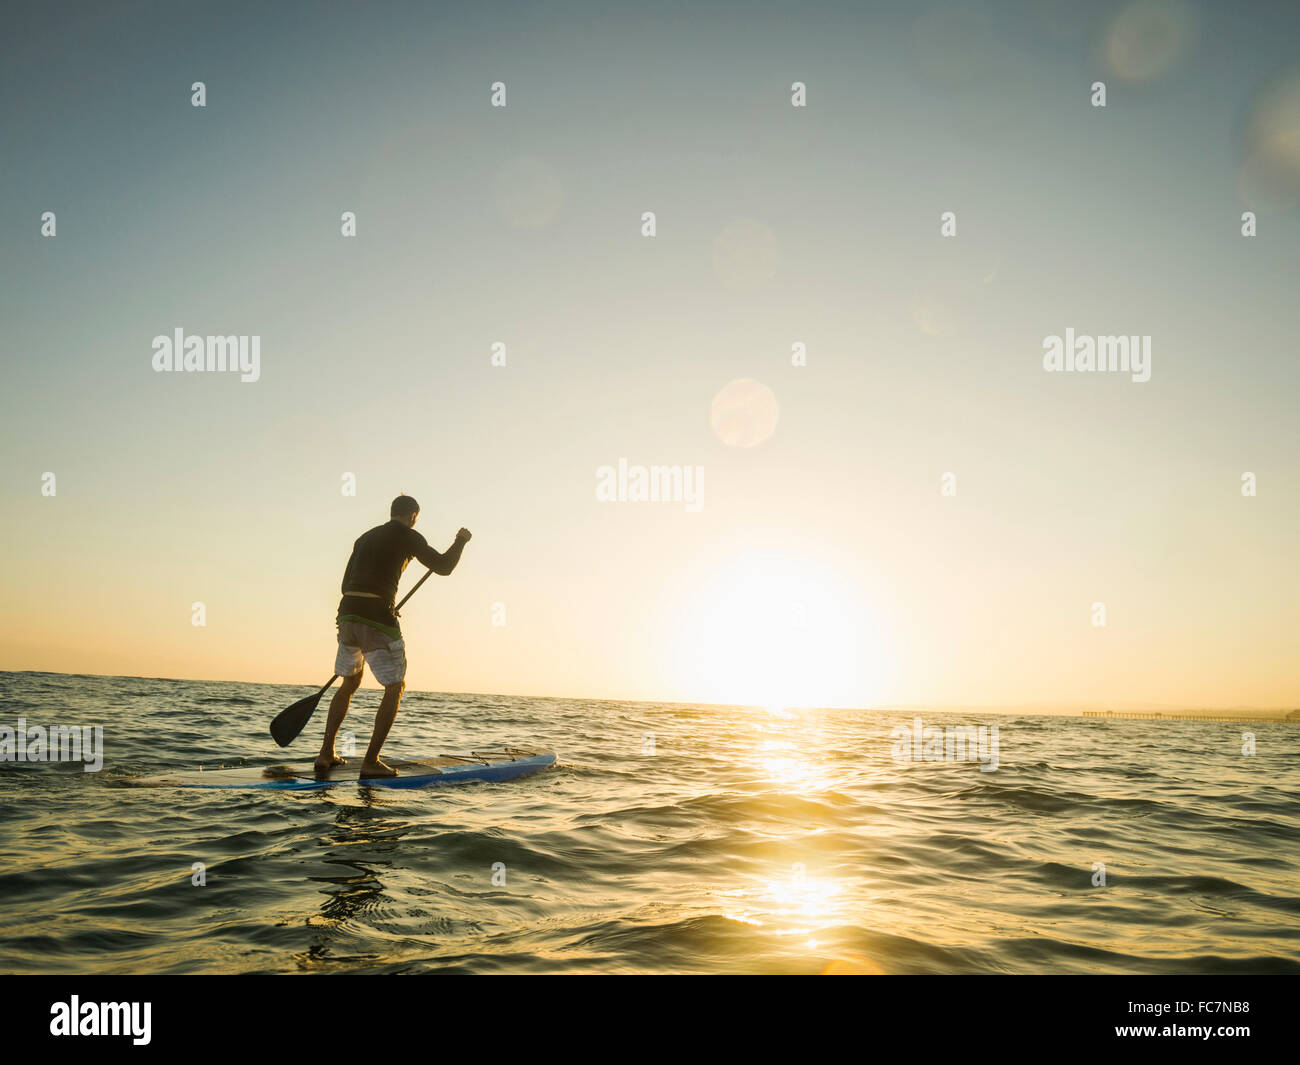 Caucasian man on paddle board in ocean Banque D'Images